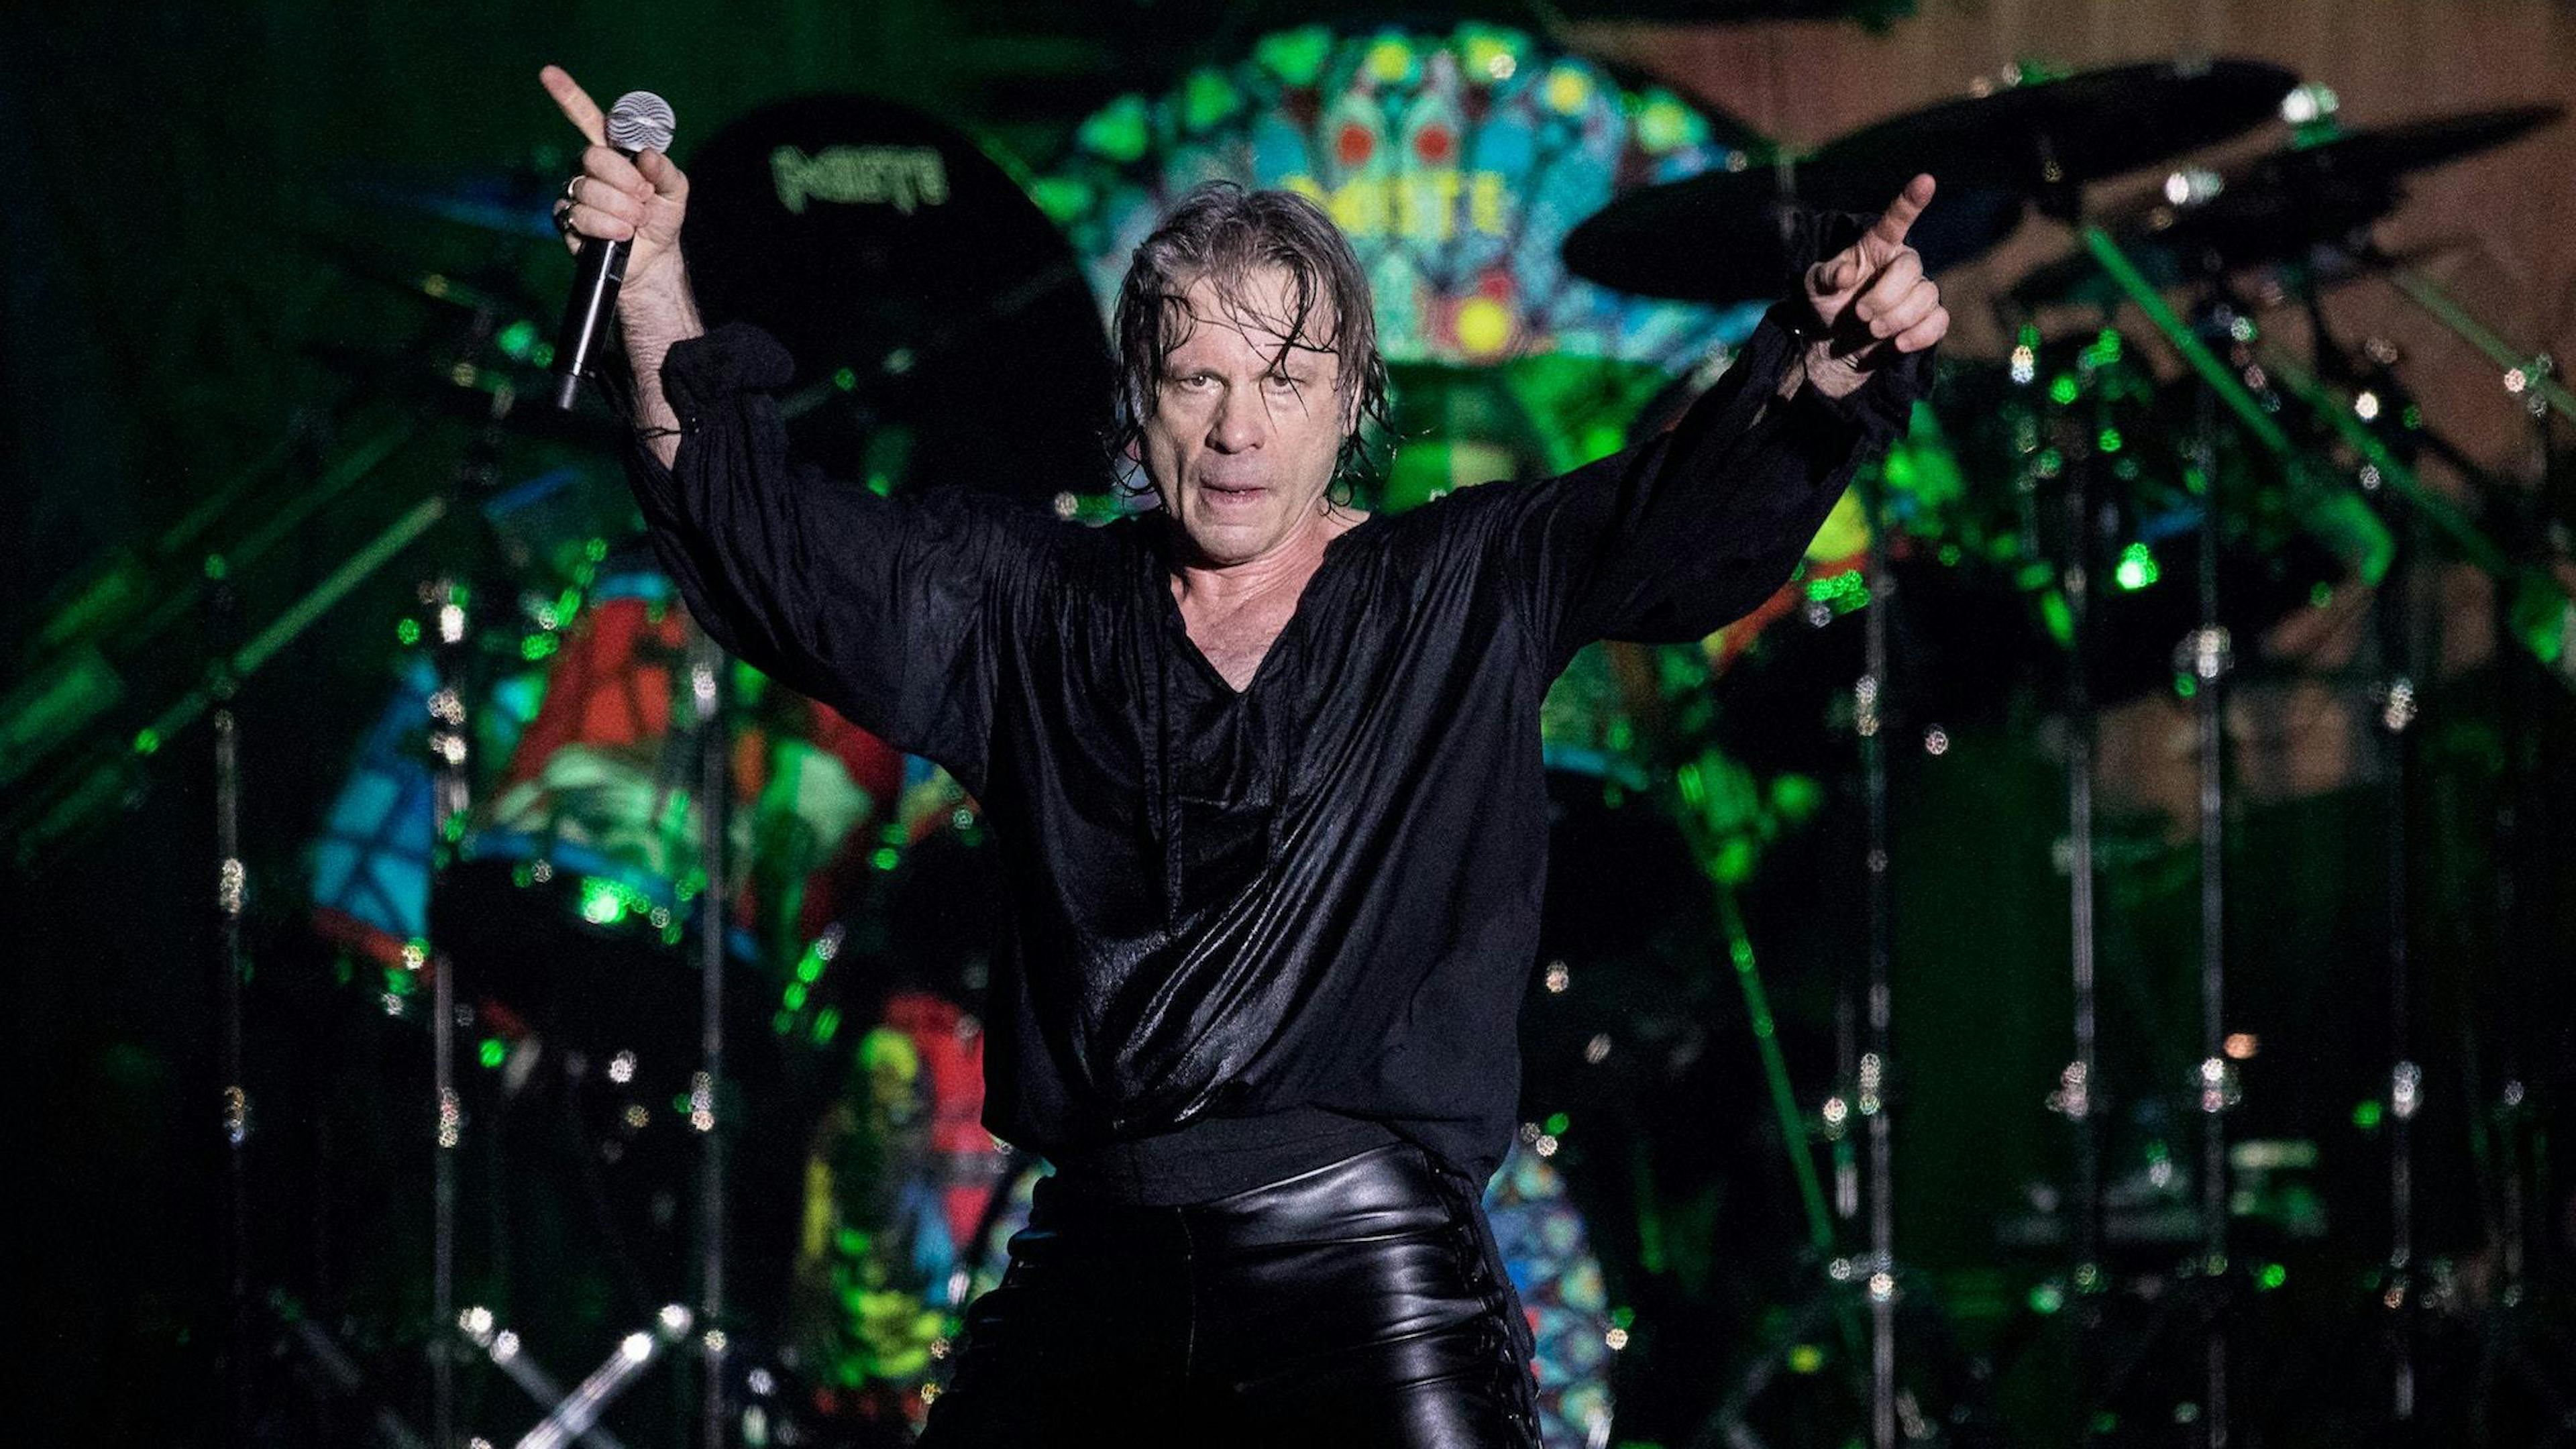 Iron Maiden's Bruce Dickinson had hip replacement: "The last tour was really quite painful"